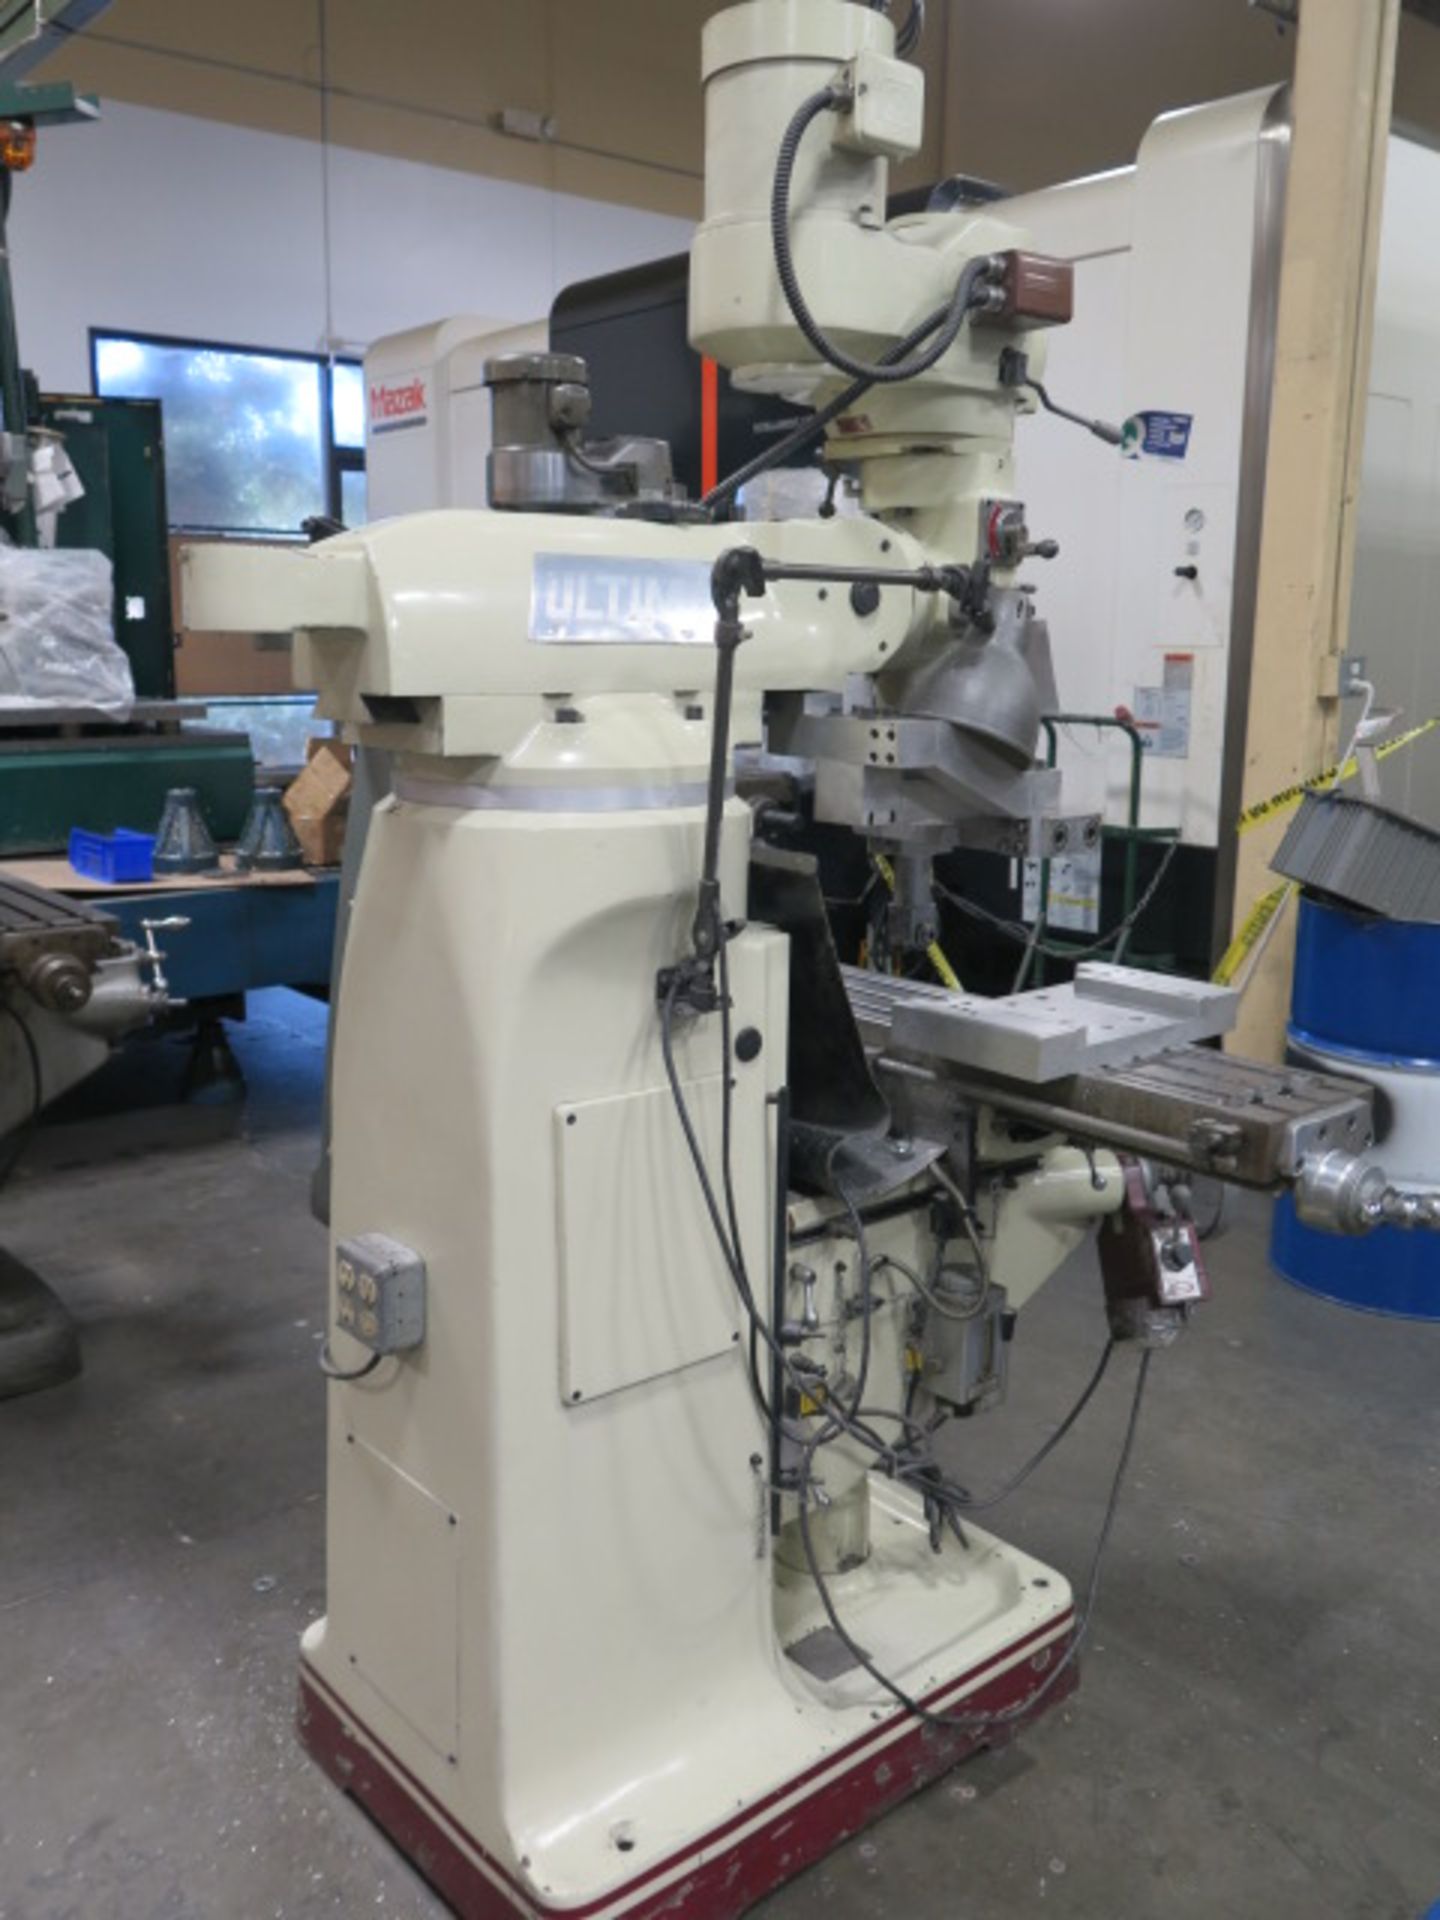 Acer Ultima Vertical Mill w/ 3Hp Motor, 60-4200 Dial Change RPM, Chrome Ways, Power “Y” and Knee Fe - Image 3 of 12